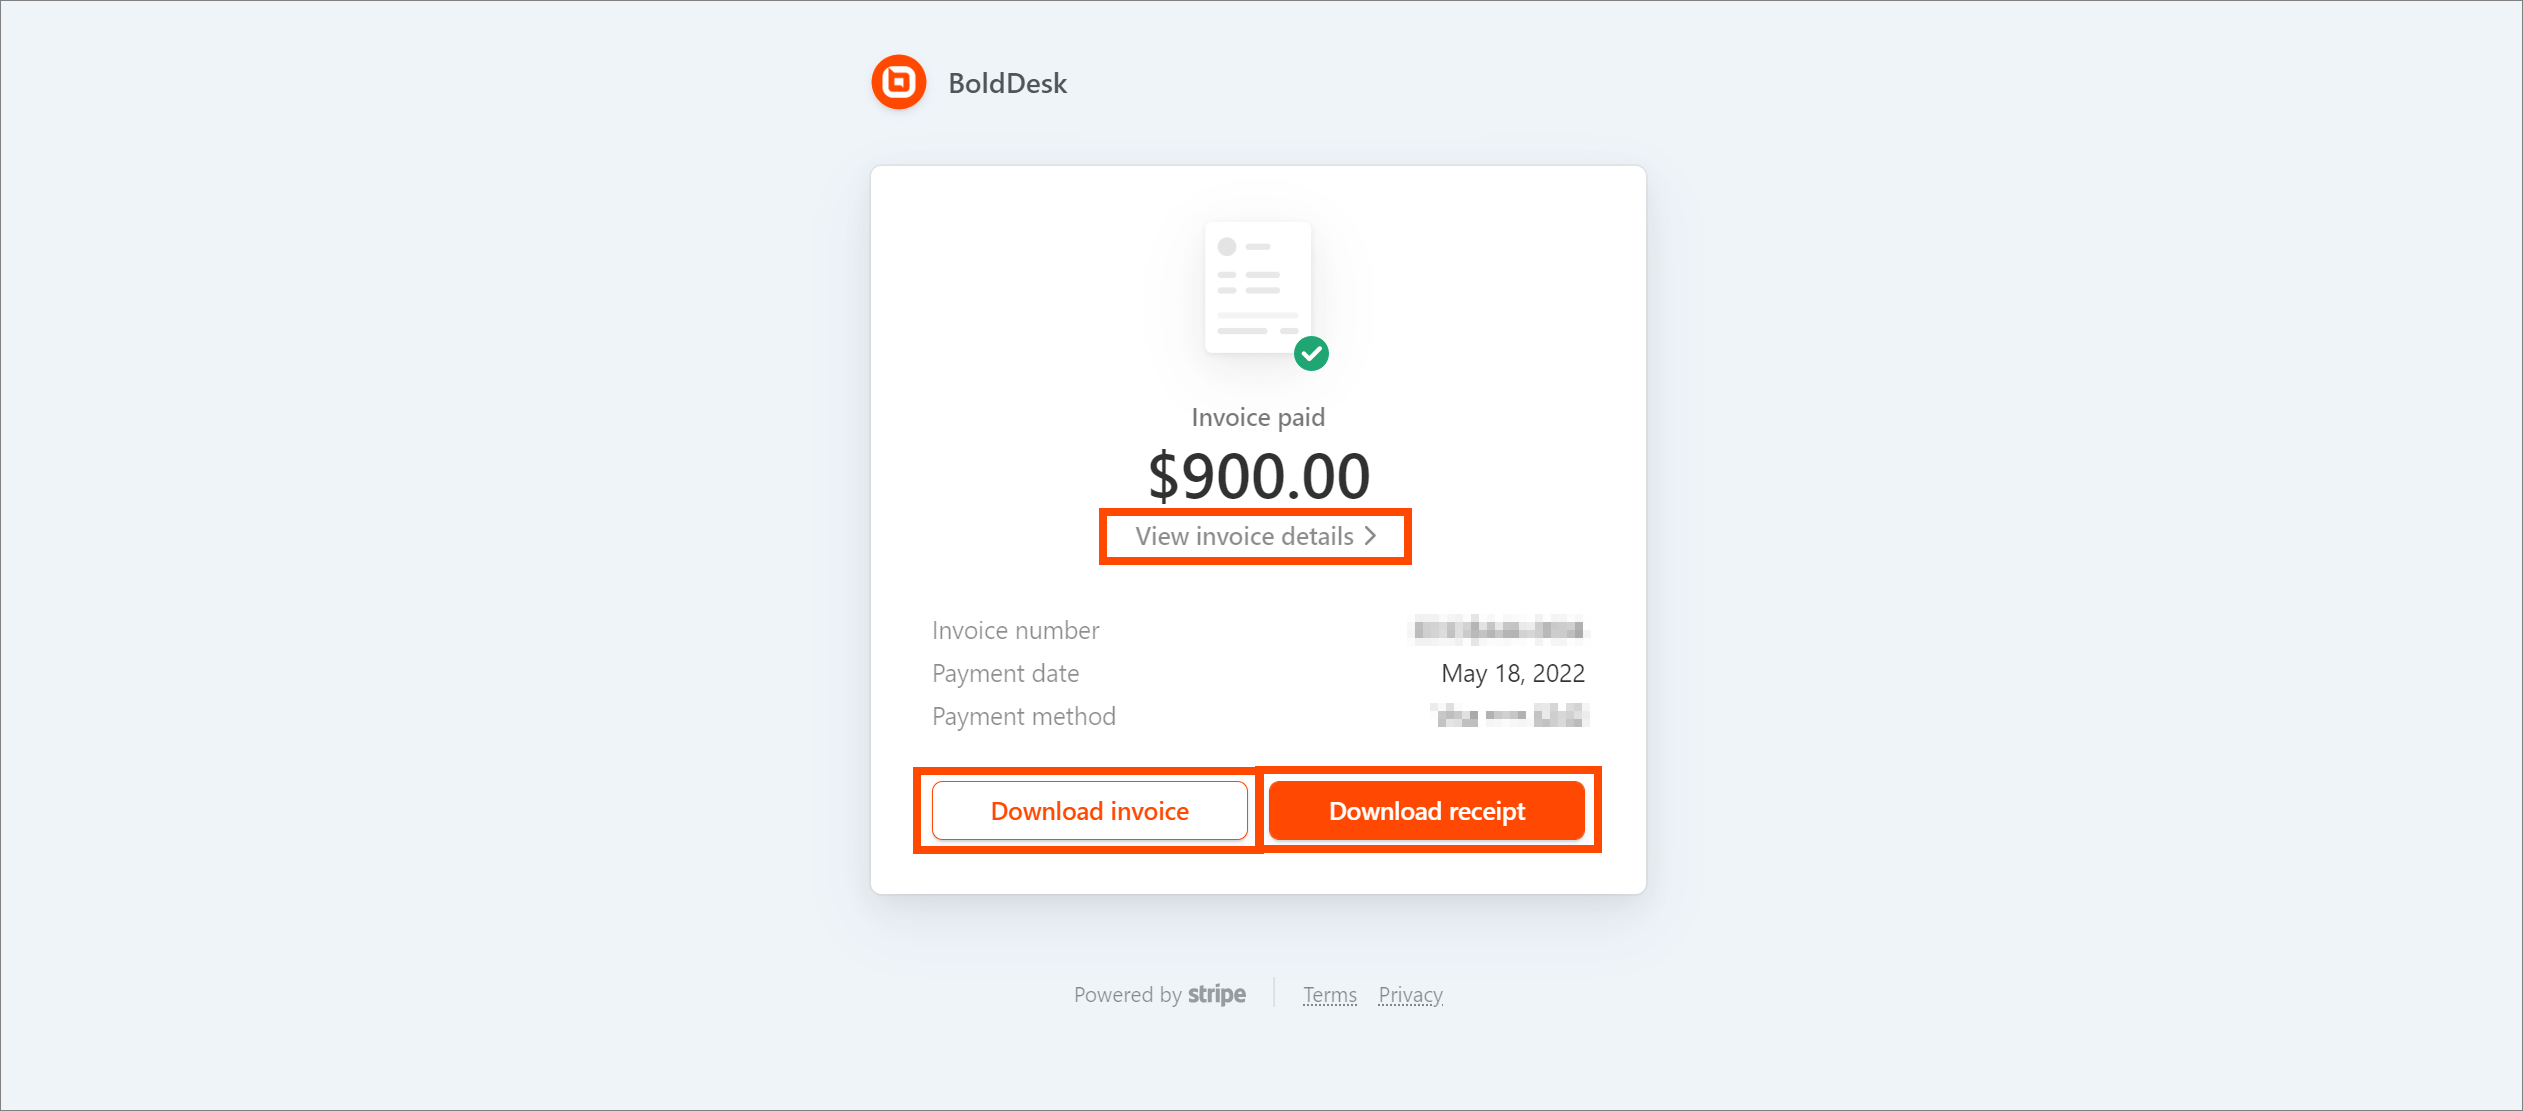 Download Invoice and Receipt Button